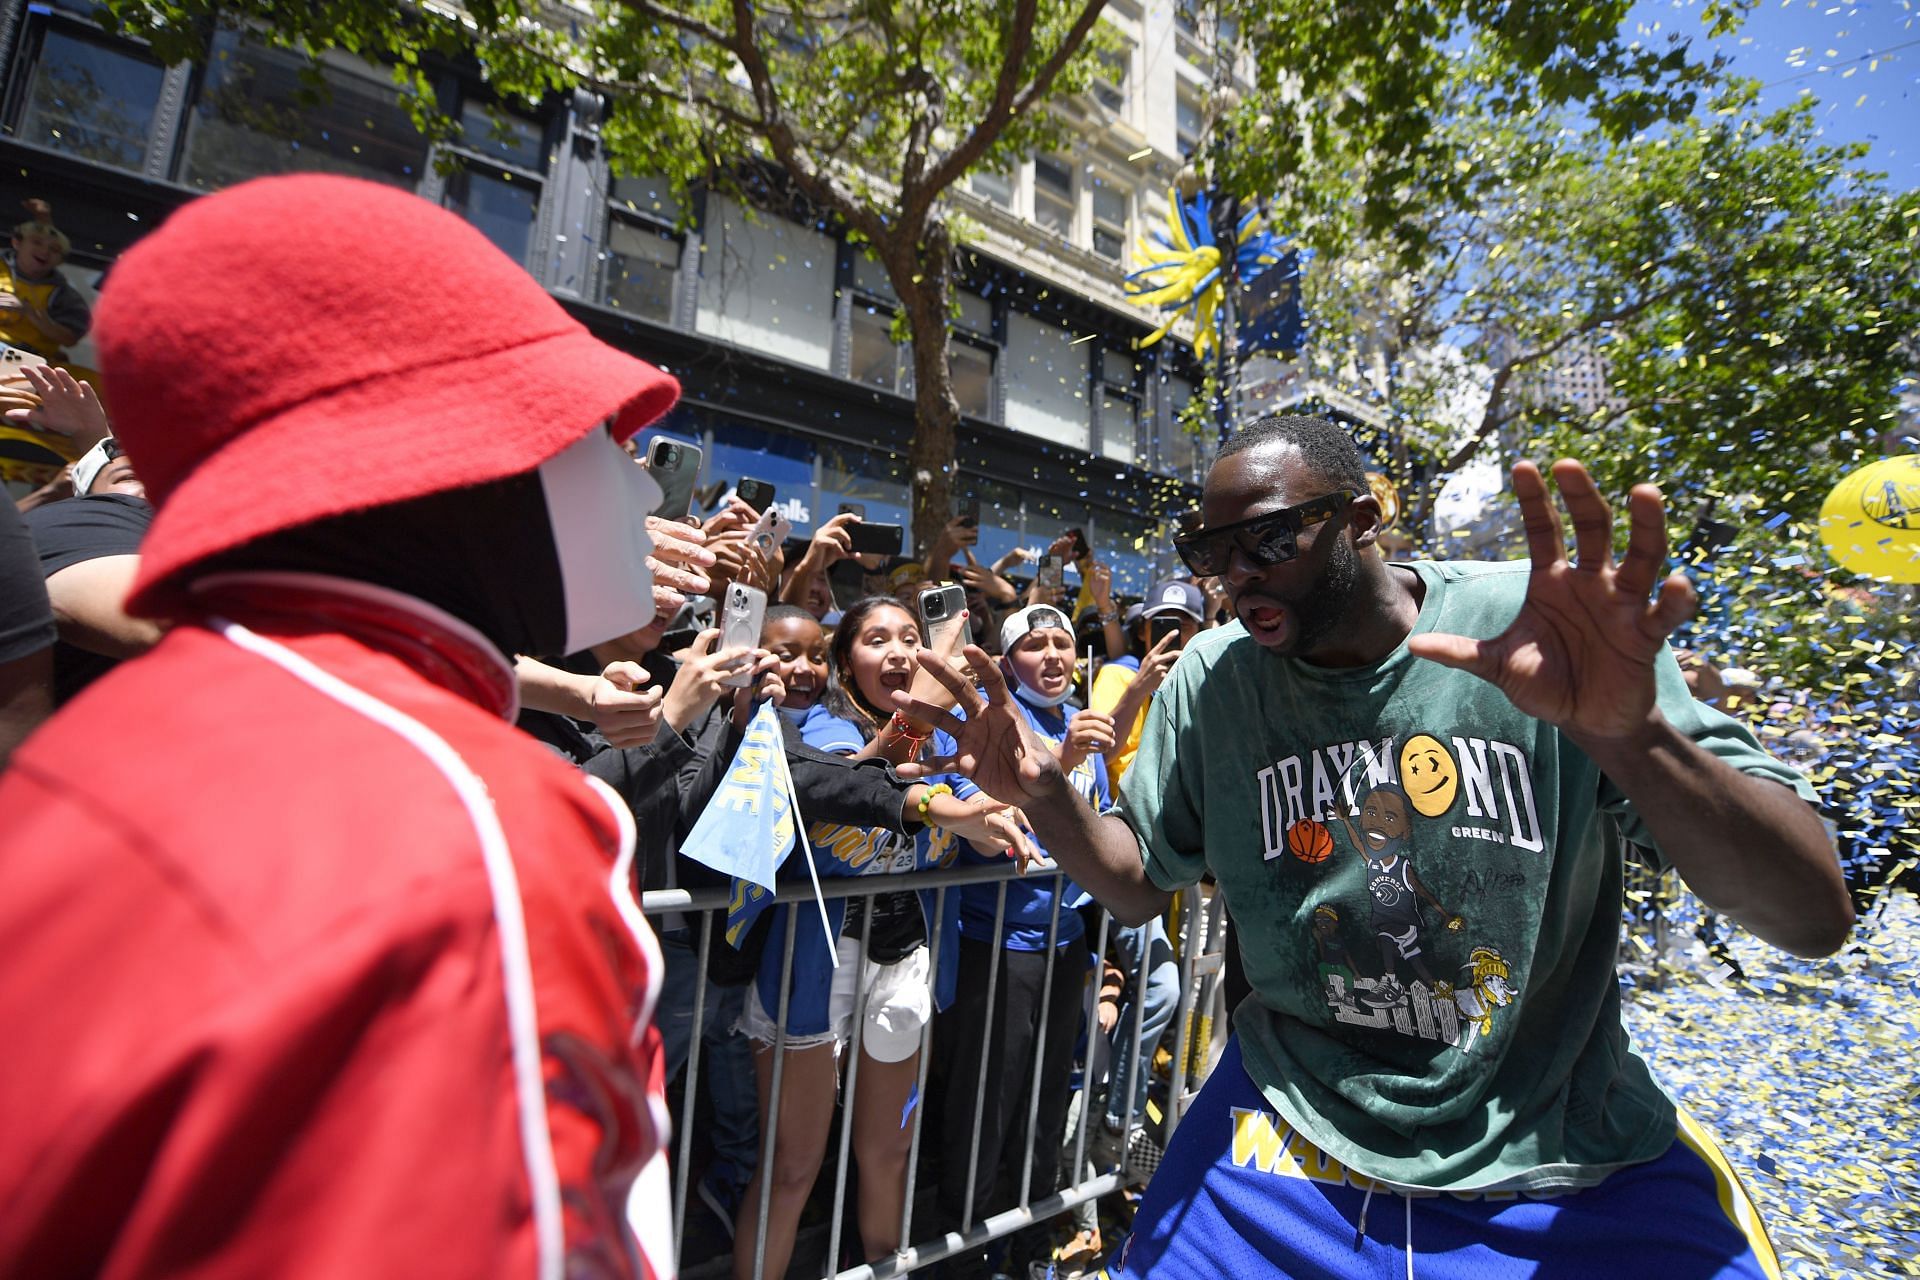 Draymond Green of the Golden State Warriors dances with fans in the crowd during their Victory Parade